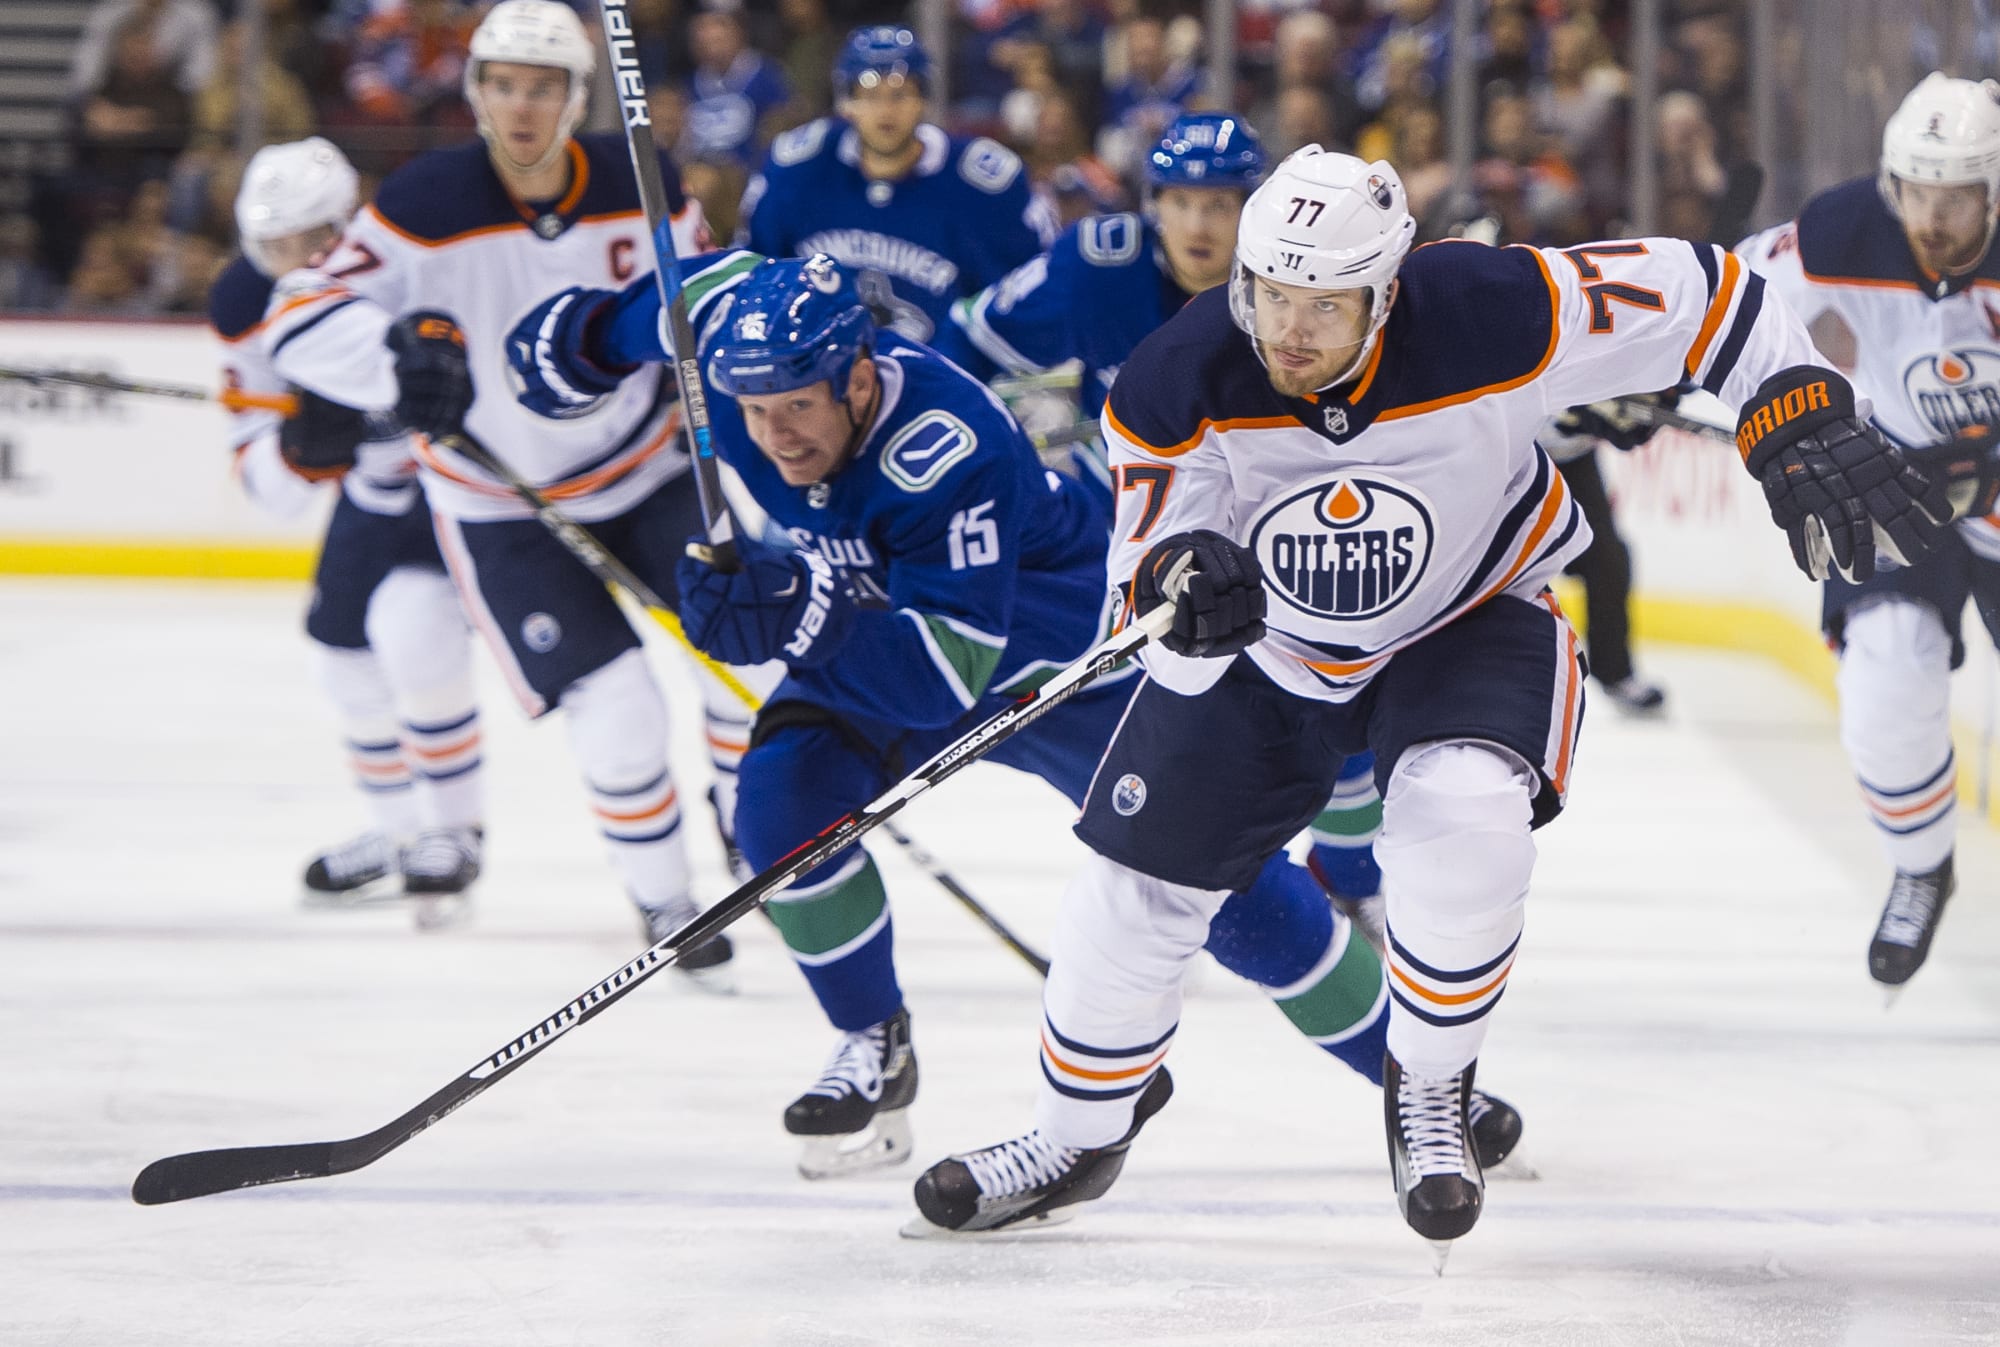 Vancouver Canucks gameday 3 keys to victory over Oilers